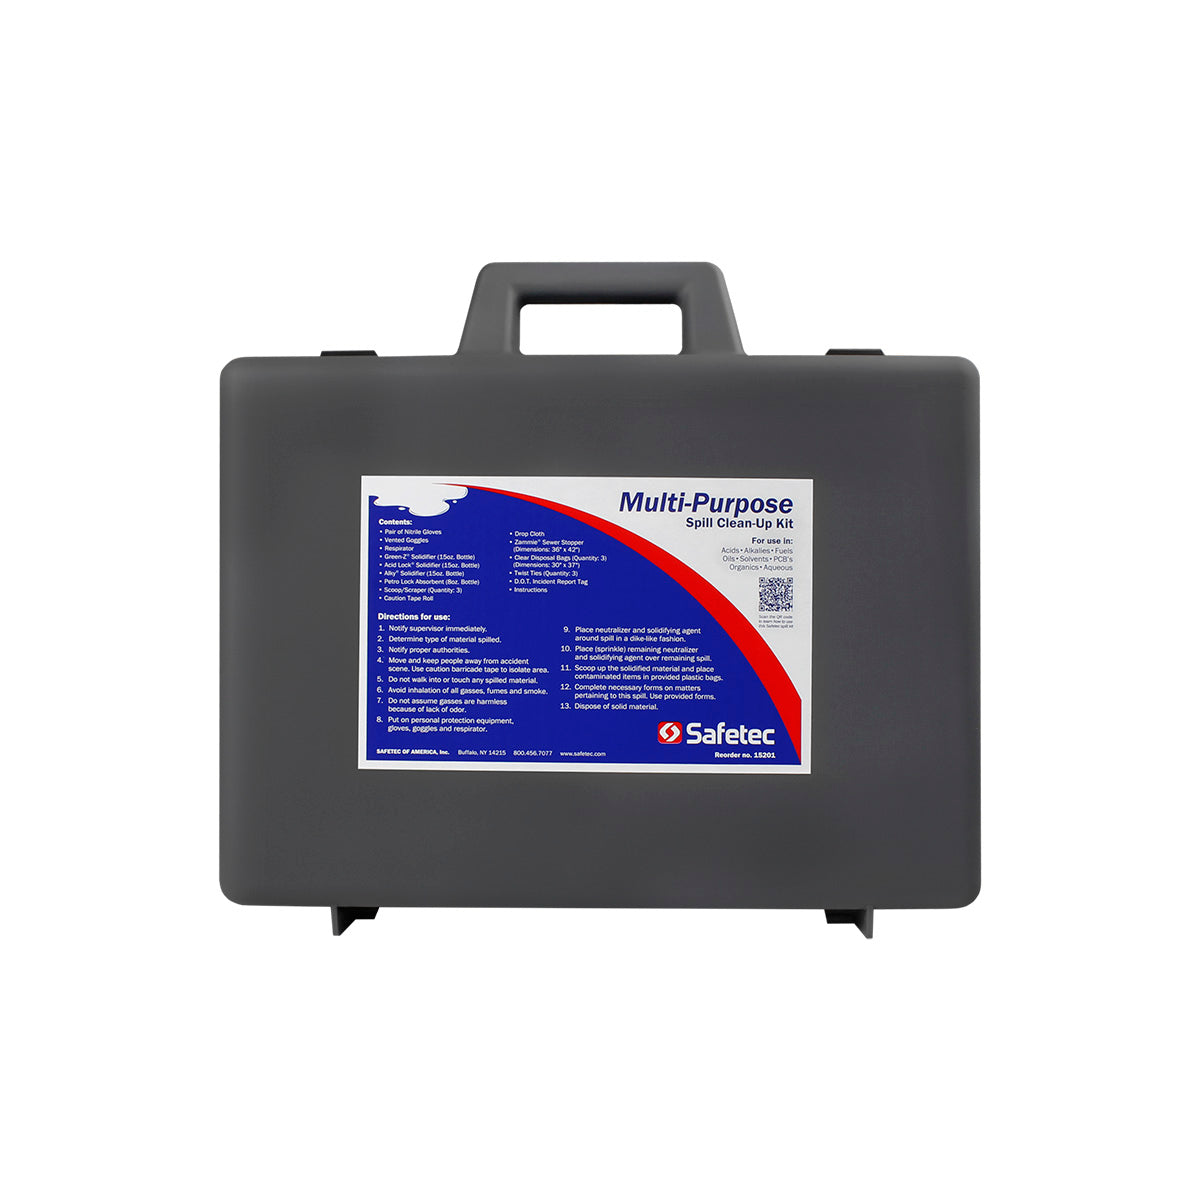 Multi-Purpose Spill Kit - For Infection and Spill Control